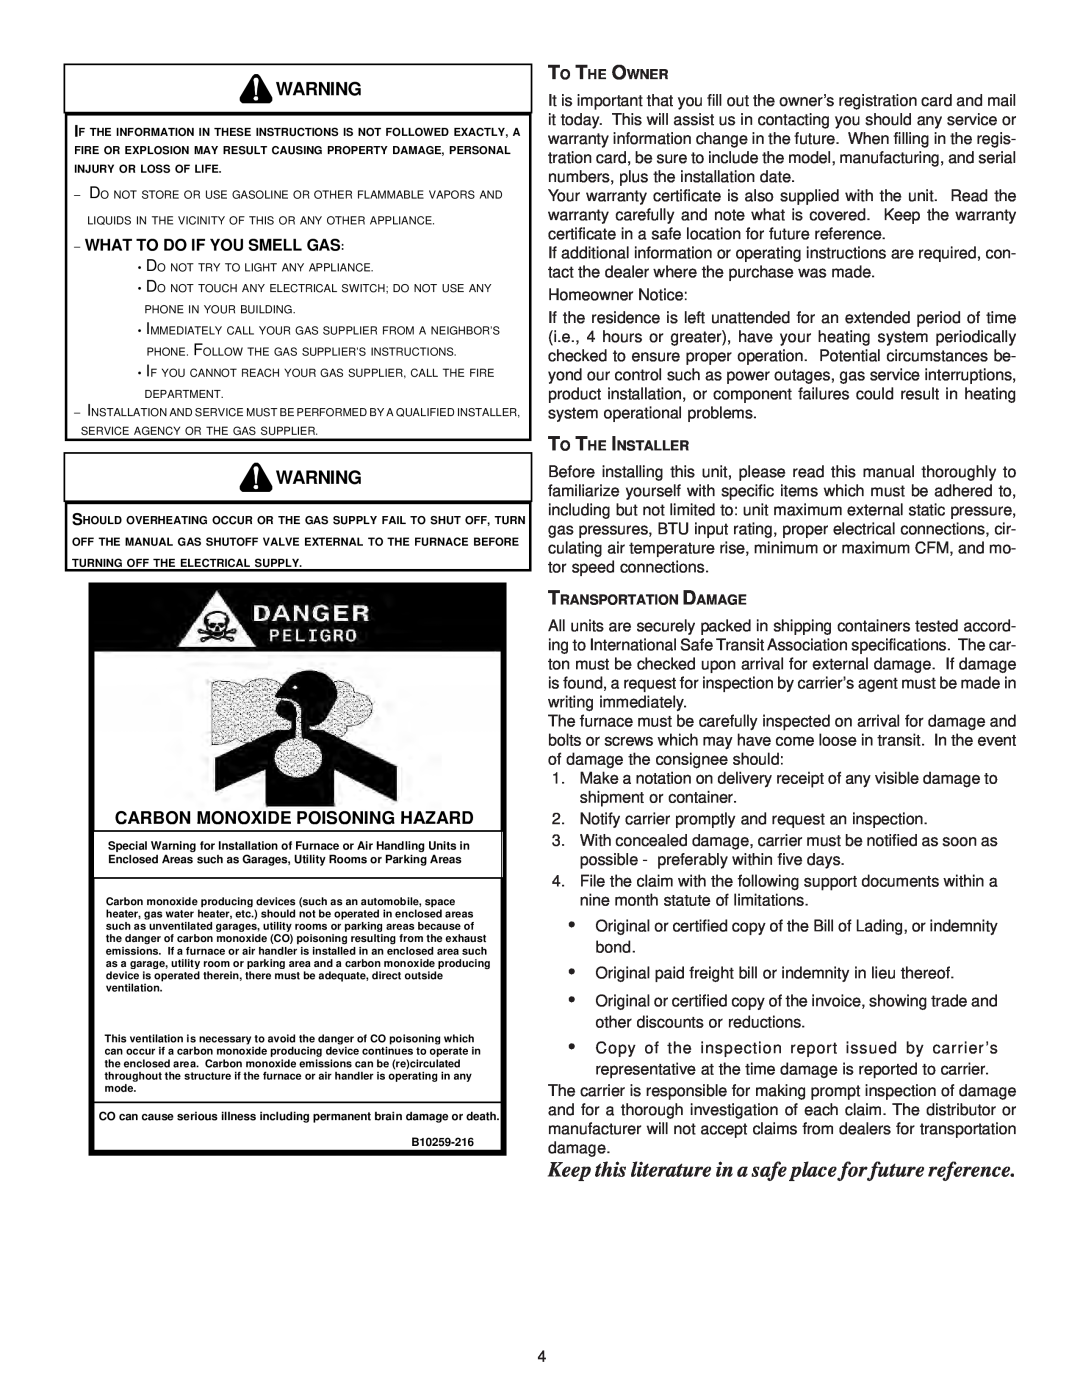 Amana AMV9, ACV9 installation instructions Carbon Monoxide Poisoning Hazard, What To Do If You Smell Gas 